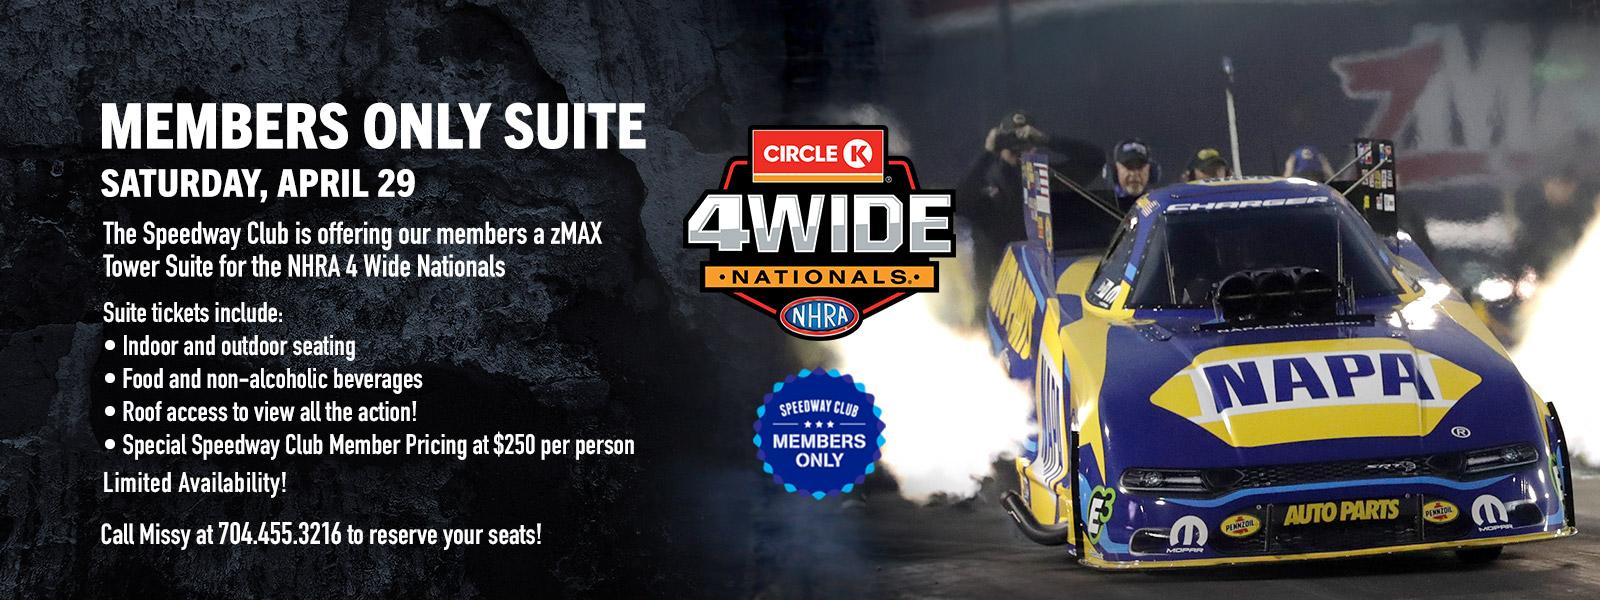 Circle K NHRA 4-Wide Nationals Members Only Suite